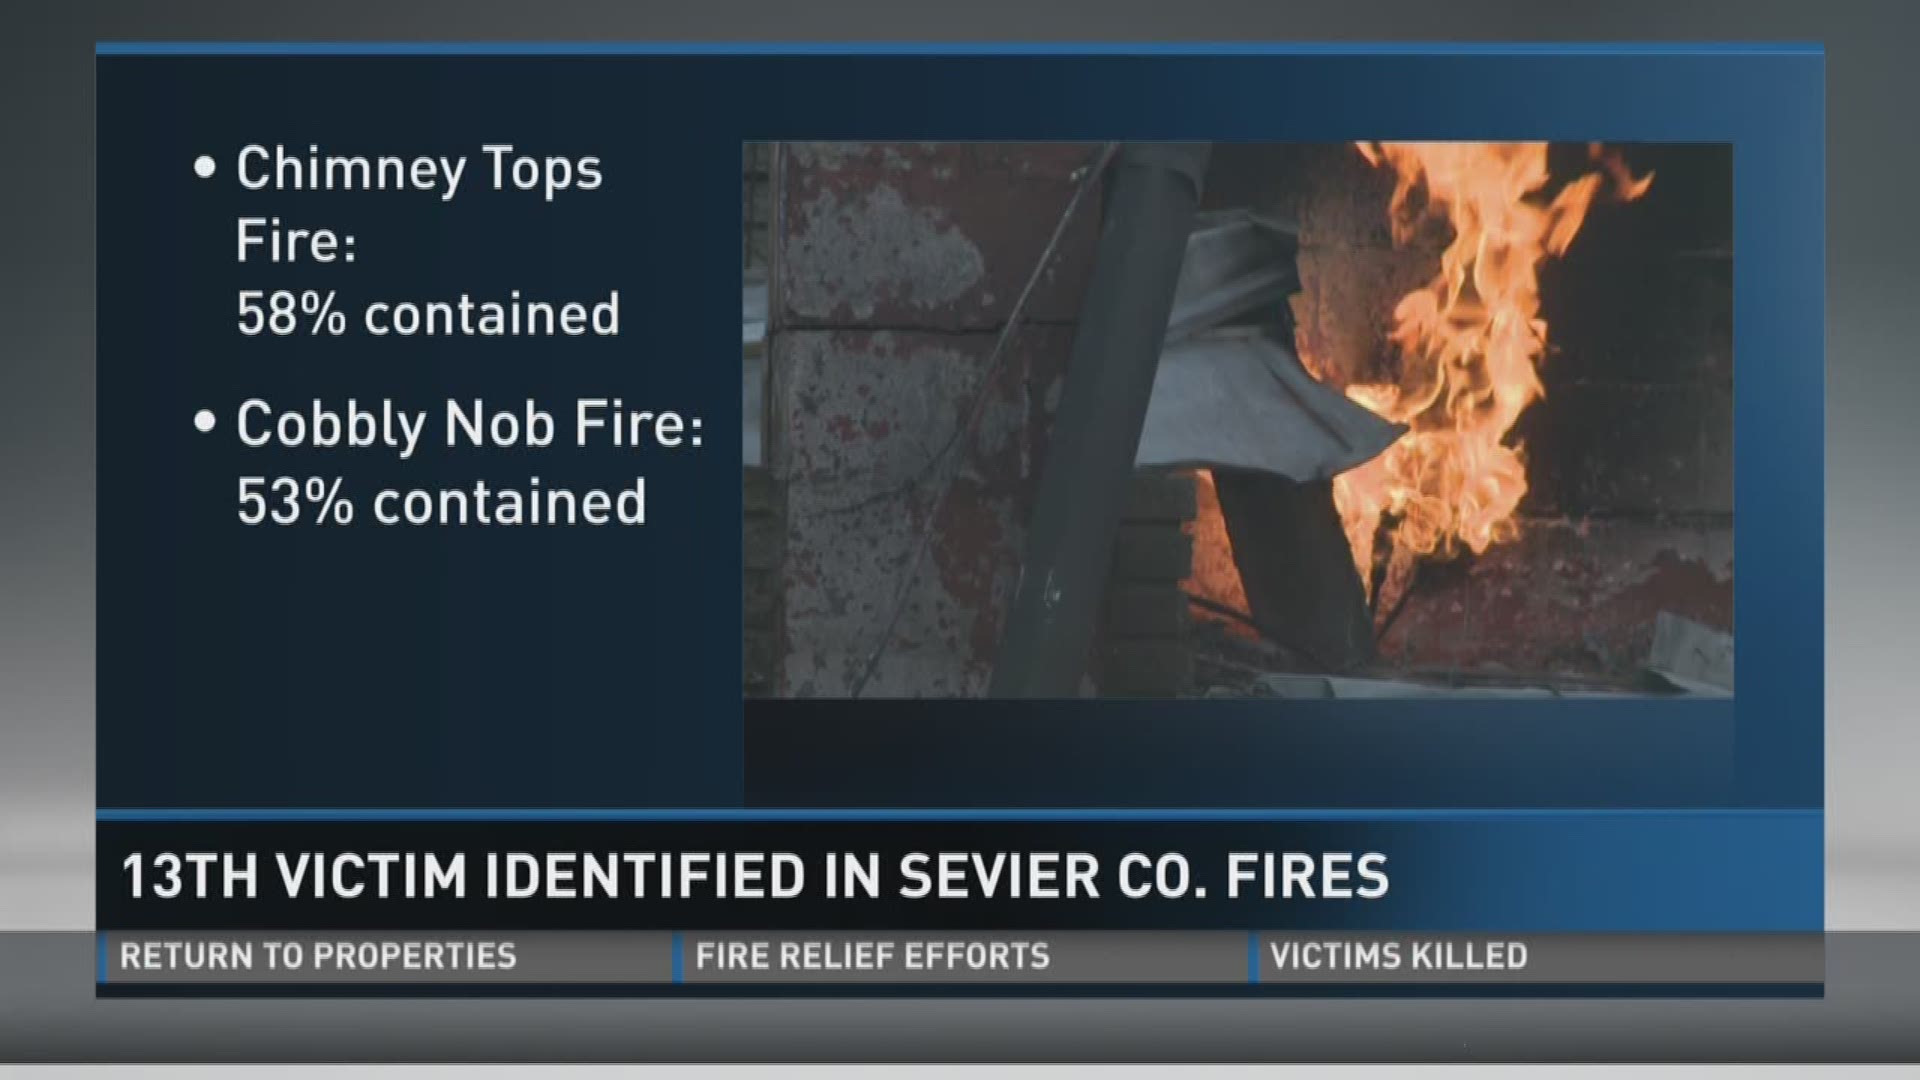 Dec. 6, 2016: Officials have now identified 13 of the 14 confirmed victims of the Sevier County fires.